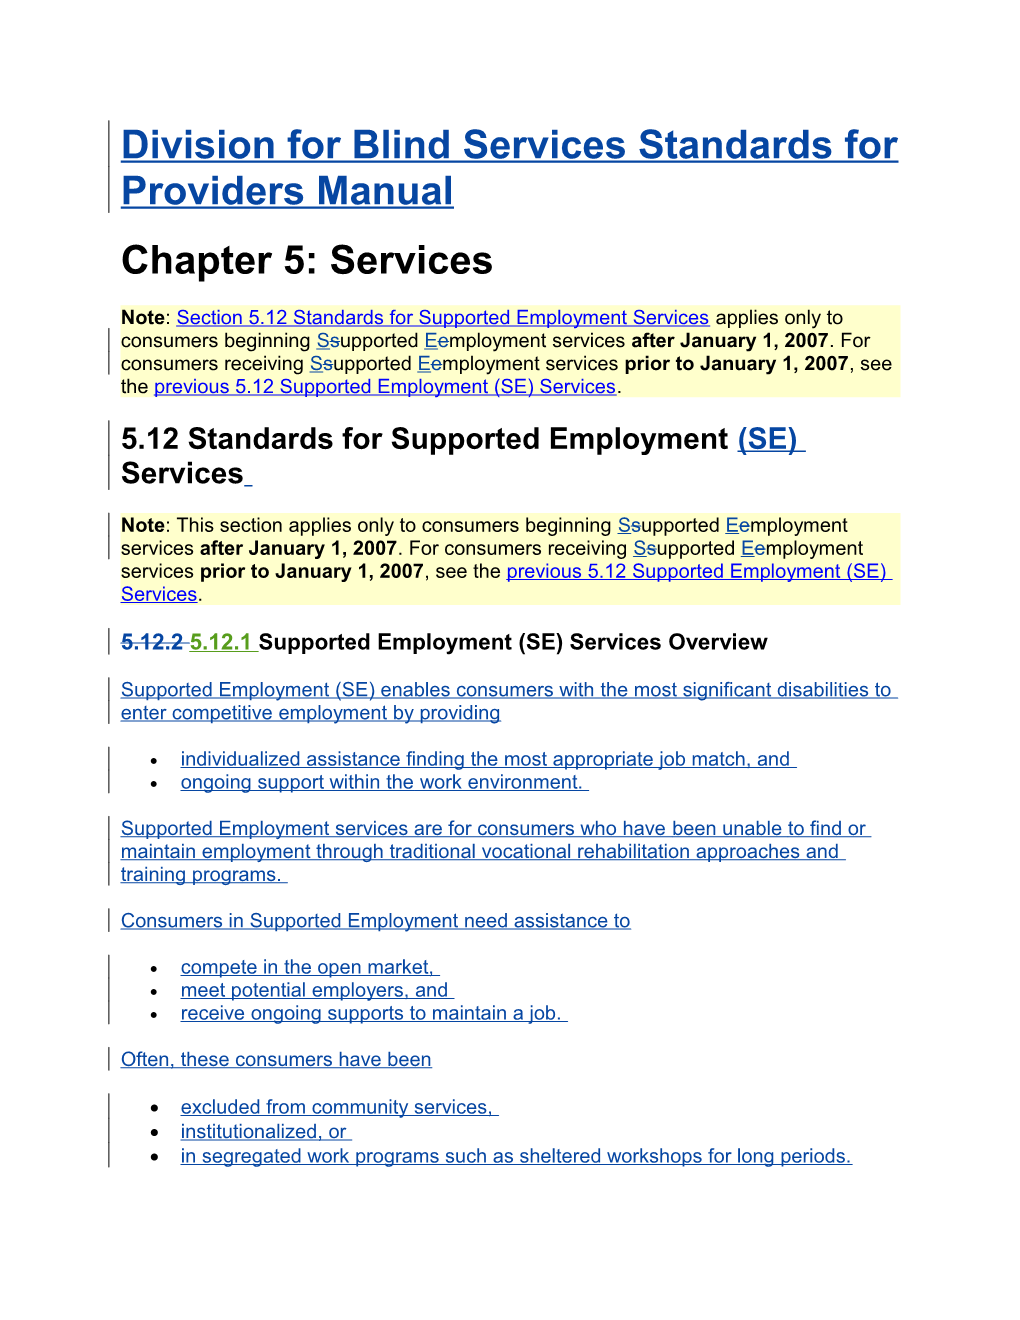 DBS Standards Manual Chapter 5.12 Revisions for October 2008